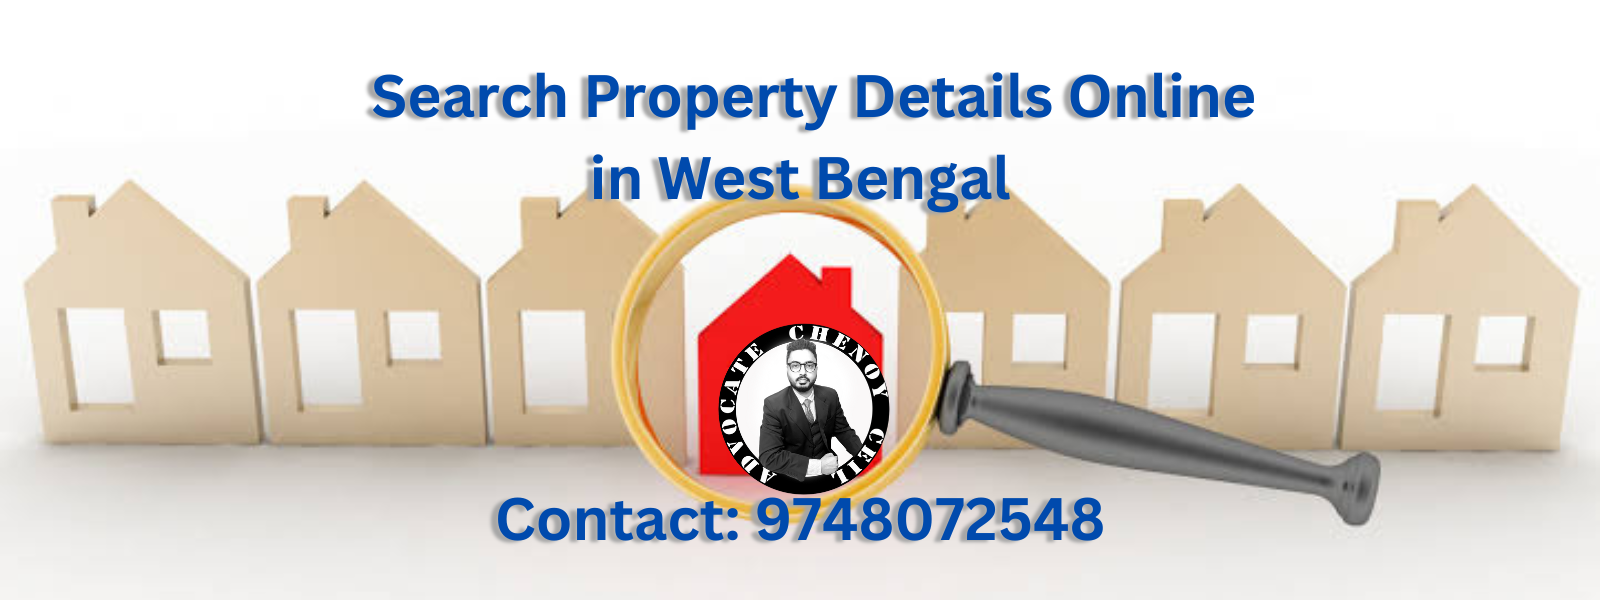 Search Property Details Online